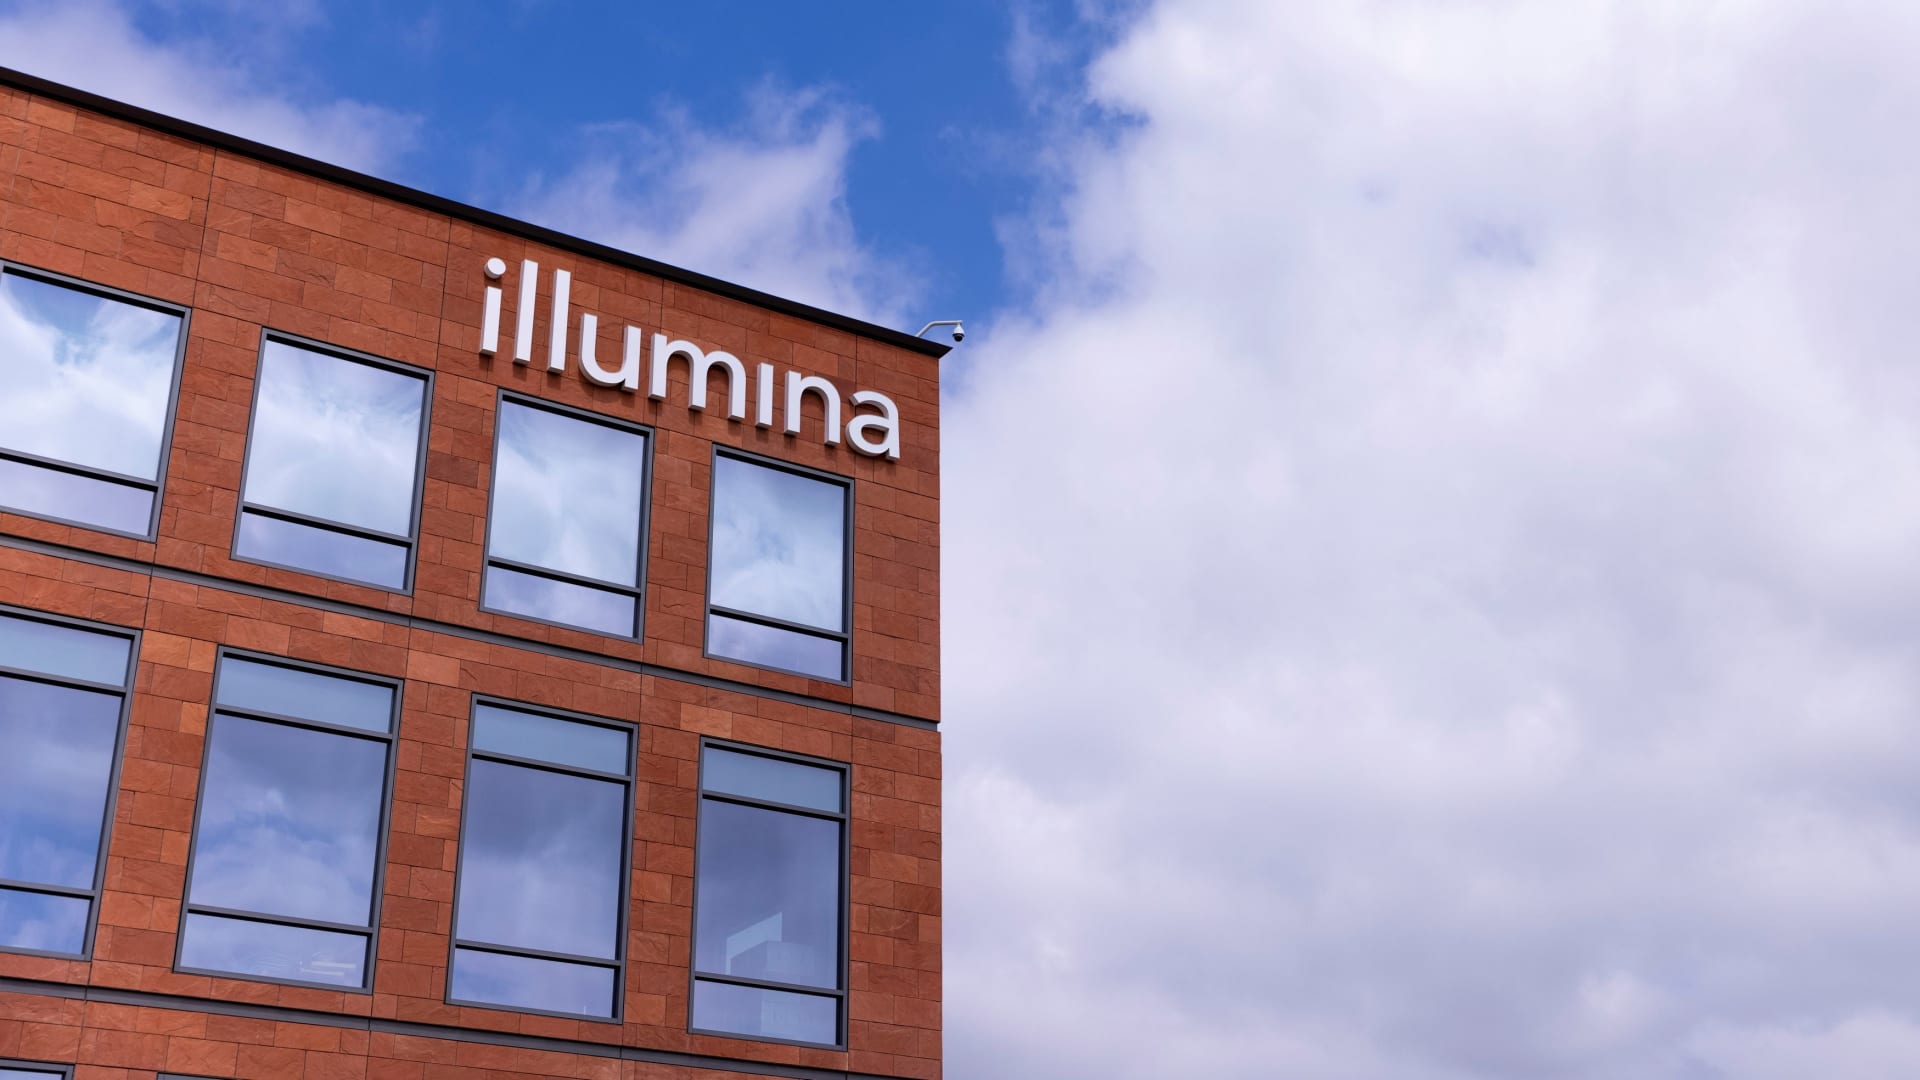 Carl Icahn supports new Illumina CEO Thaysen after proxy fight